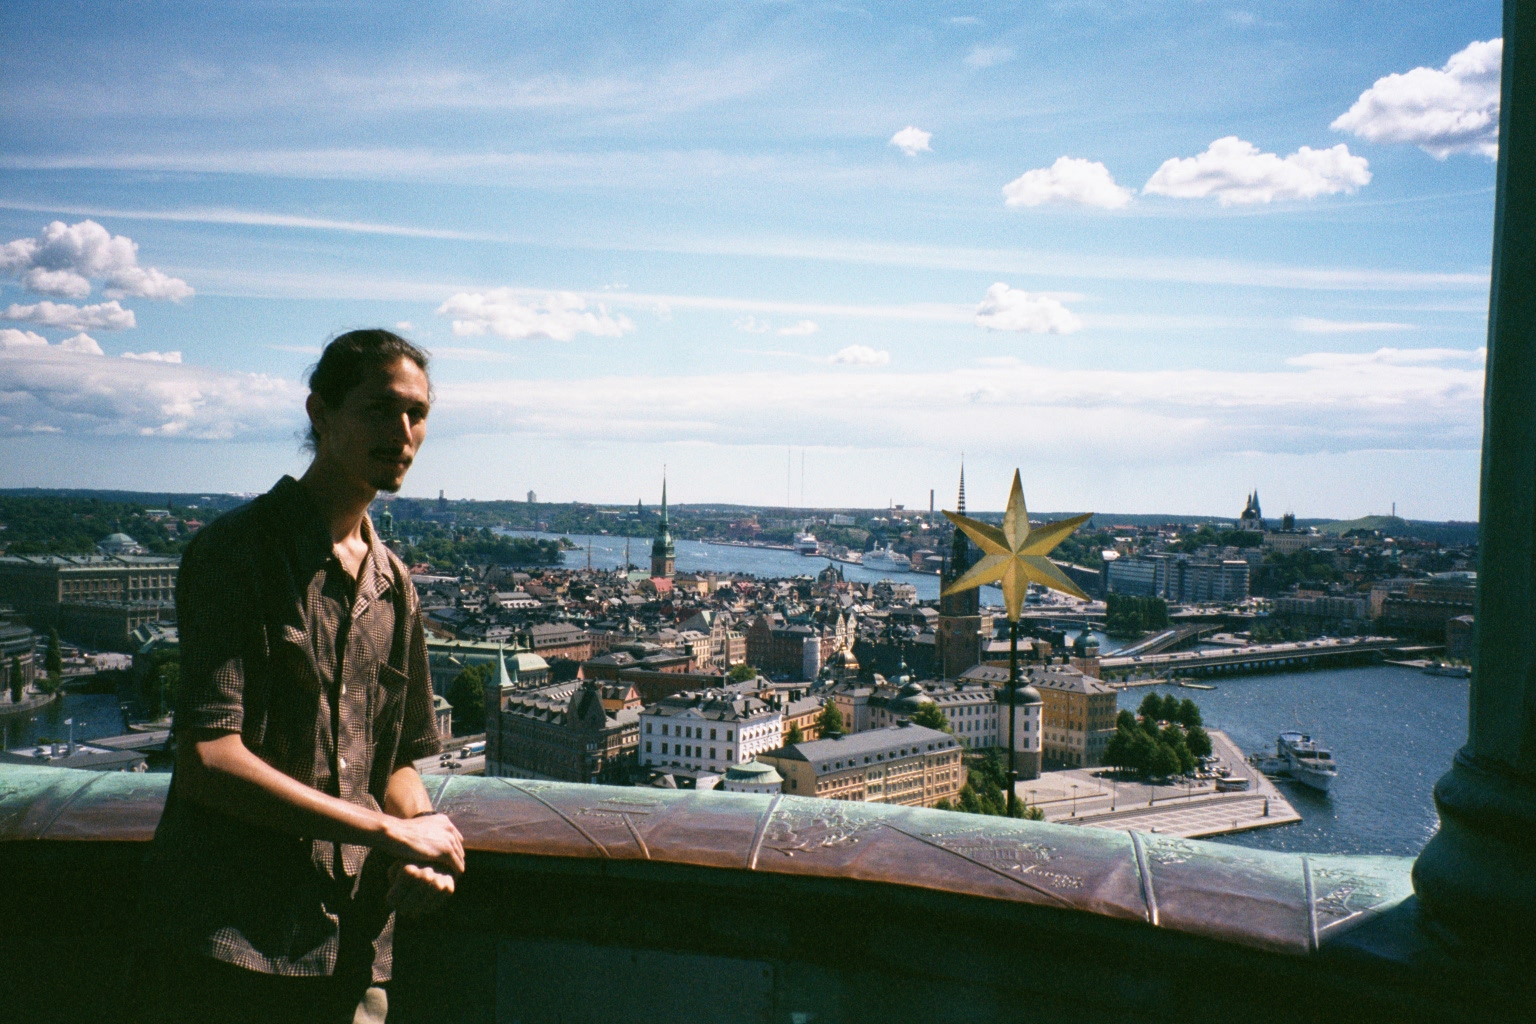 From the city tower in Stockholm